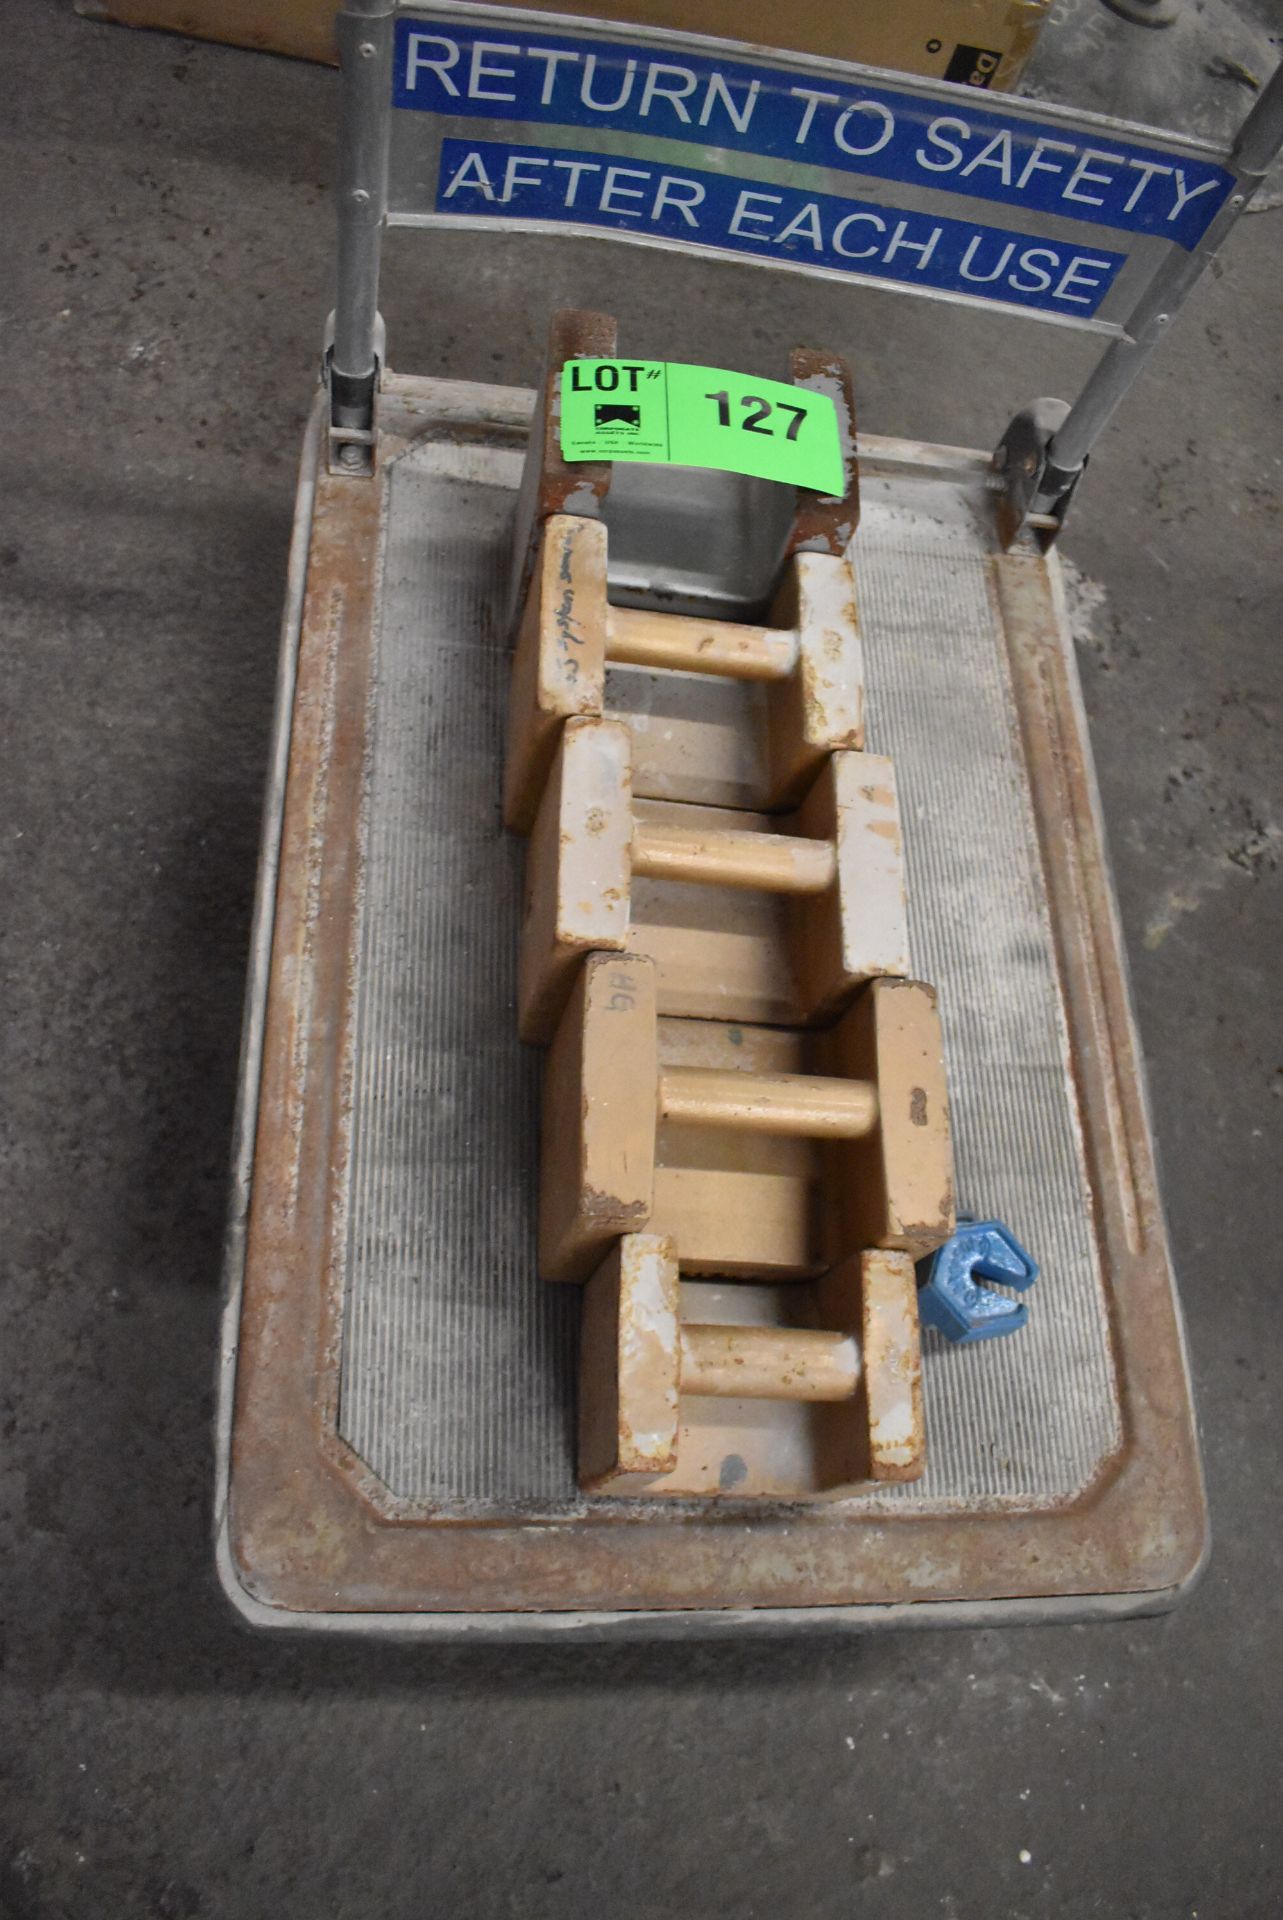 LOT/ CALIBRATION WEIGHTS WITH CART [RIGGING FEE FOR LOT #127 - $30 CAD PLUS APPLICABLE TAXES]